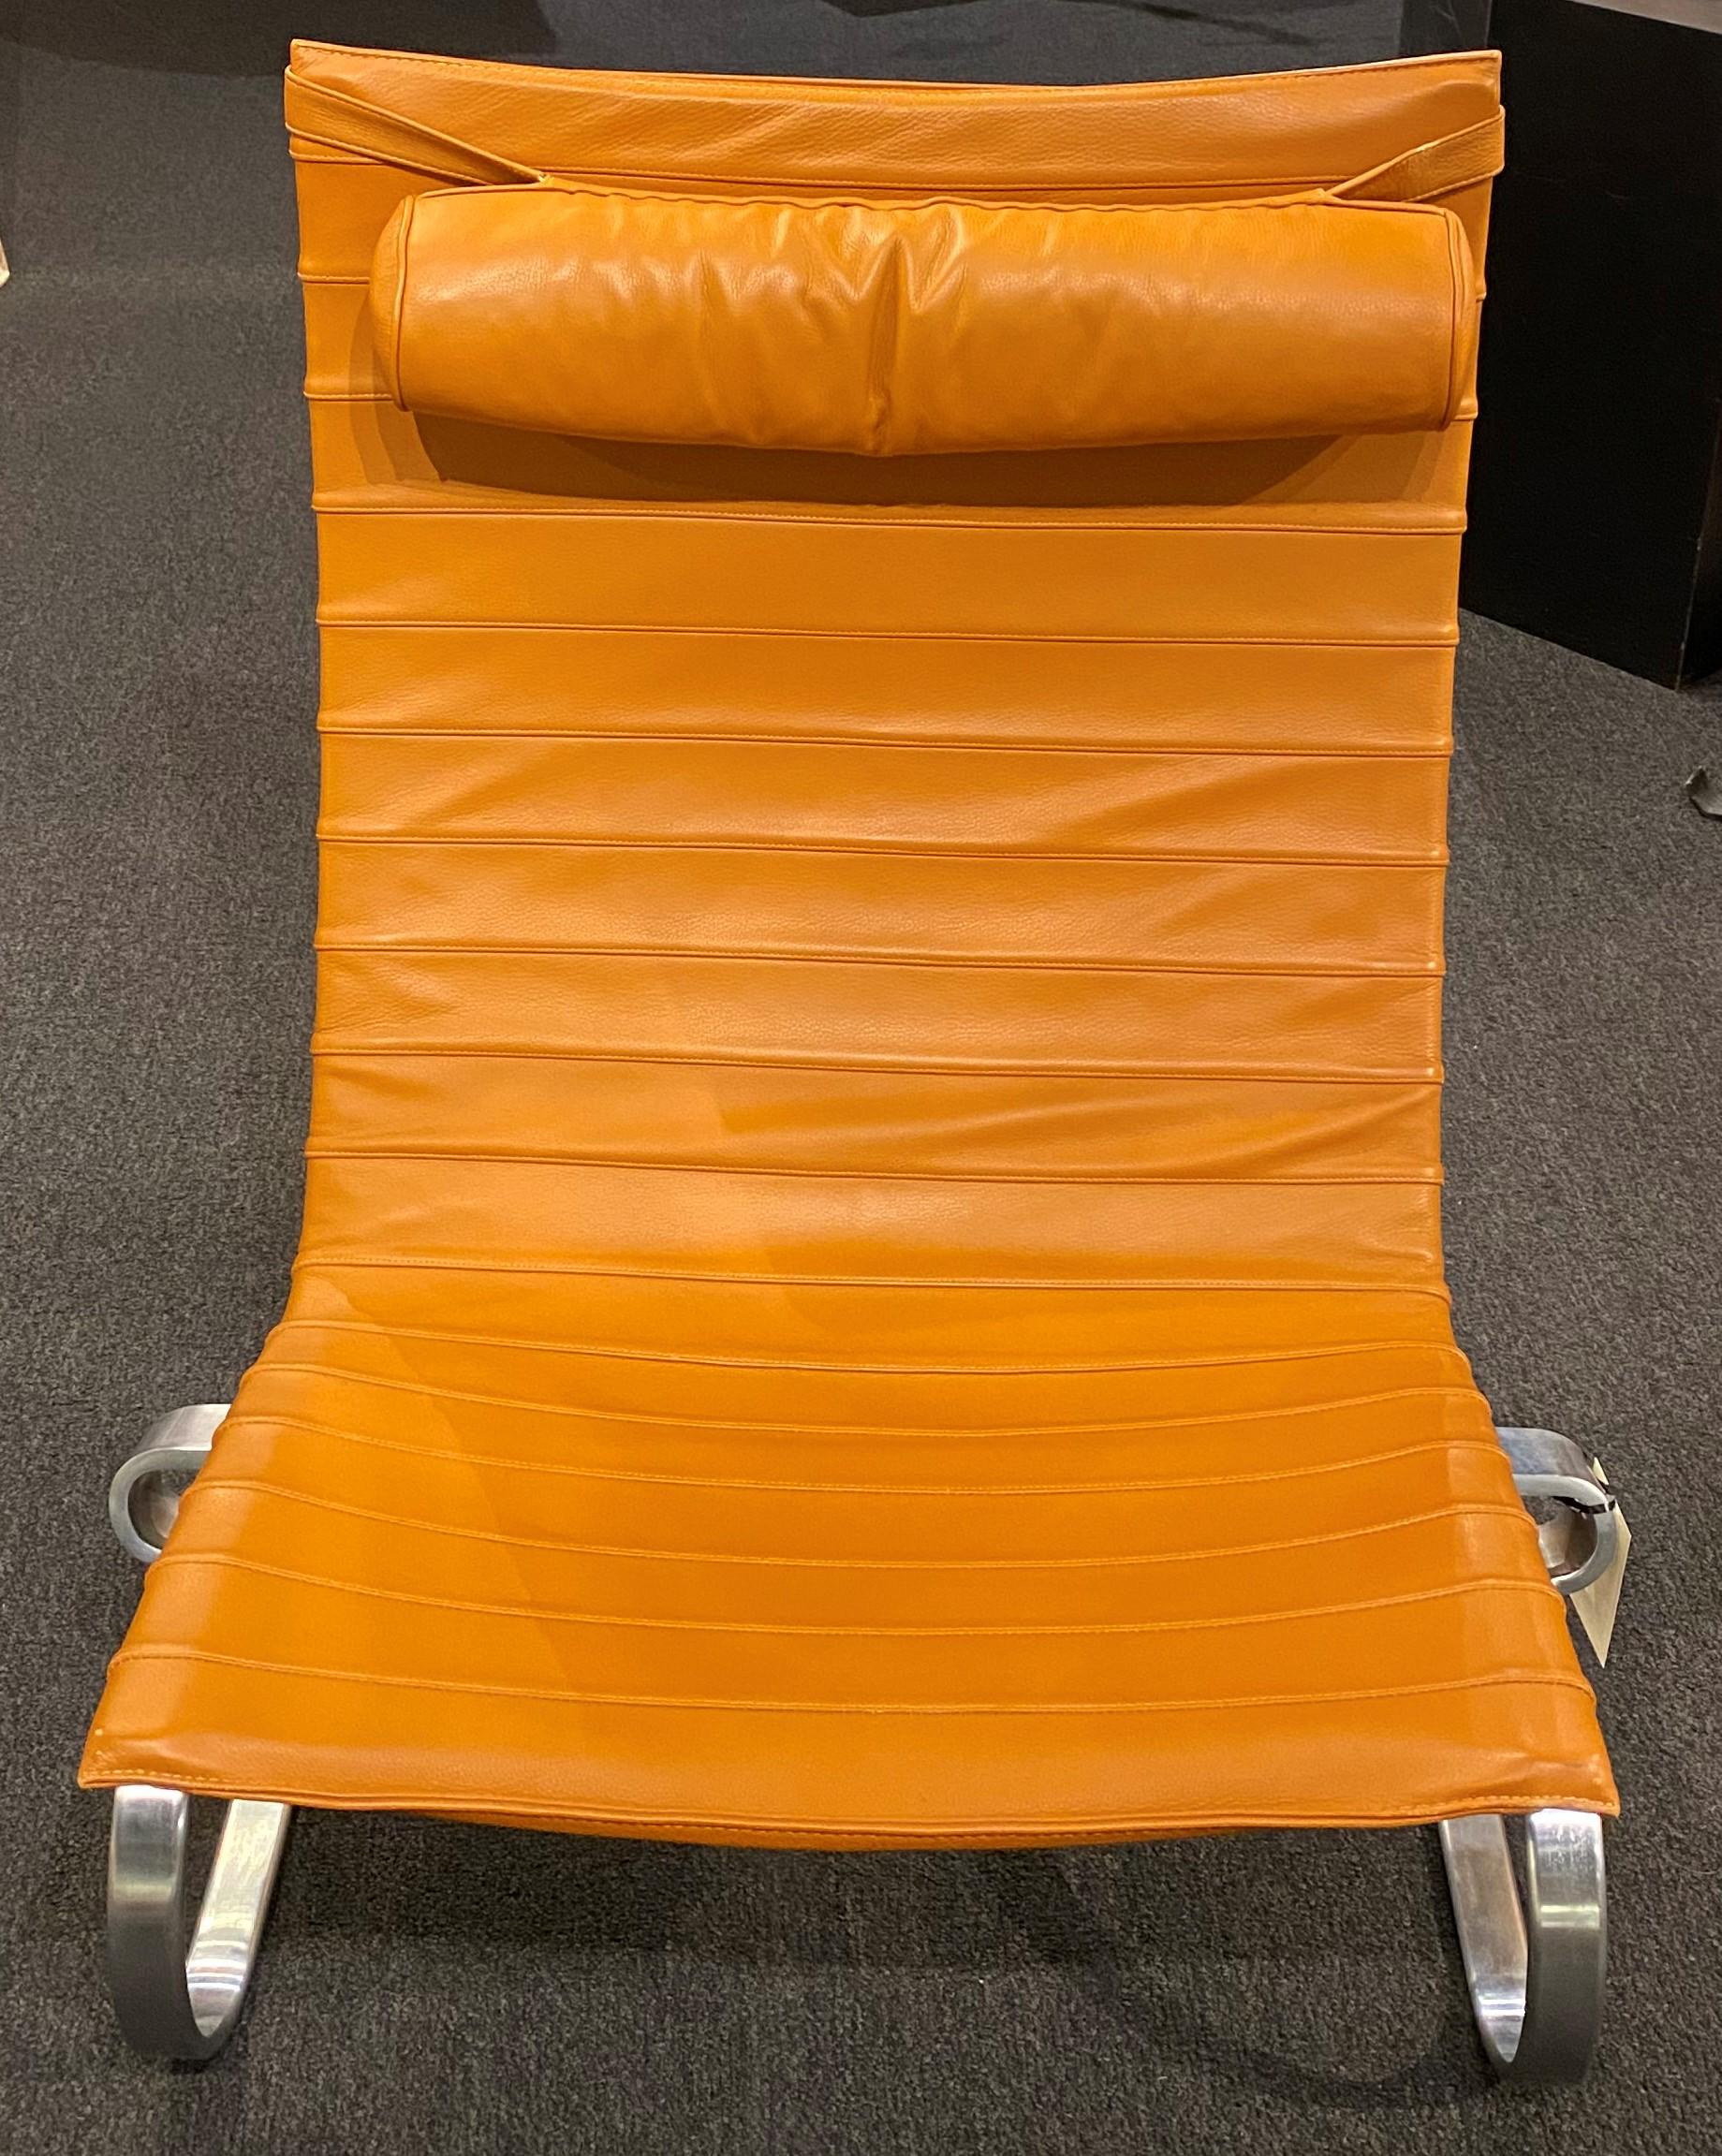 Designed by Poul Kjærholm for Fritz Hansen A/S in Denmark, the PK20 is a comfortable and elegant lounge or easy chair with orange leather seat and headrest in a flexible matte chromed spring steel frame. Signed and dated 2000 on the underside of the